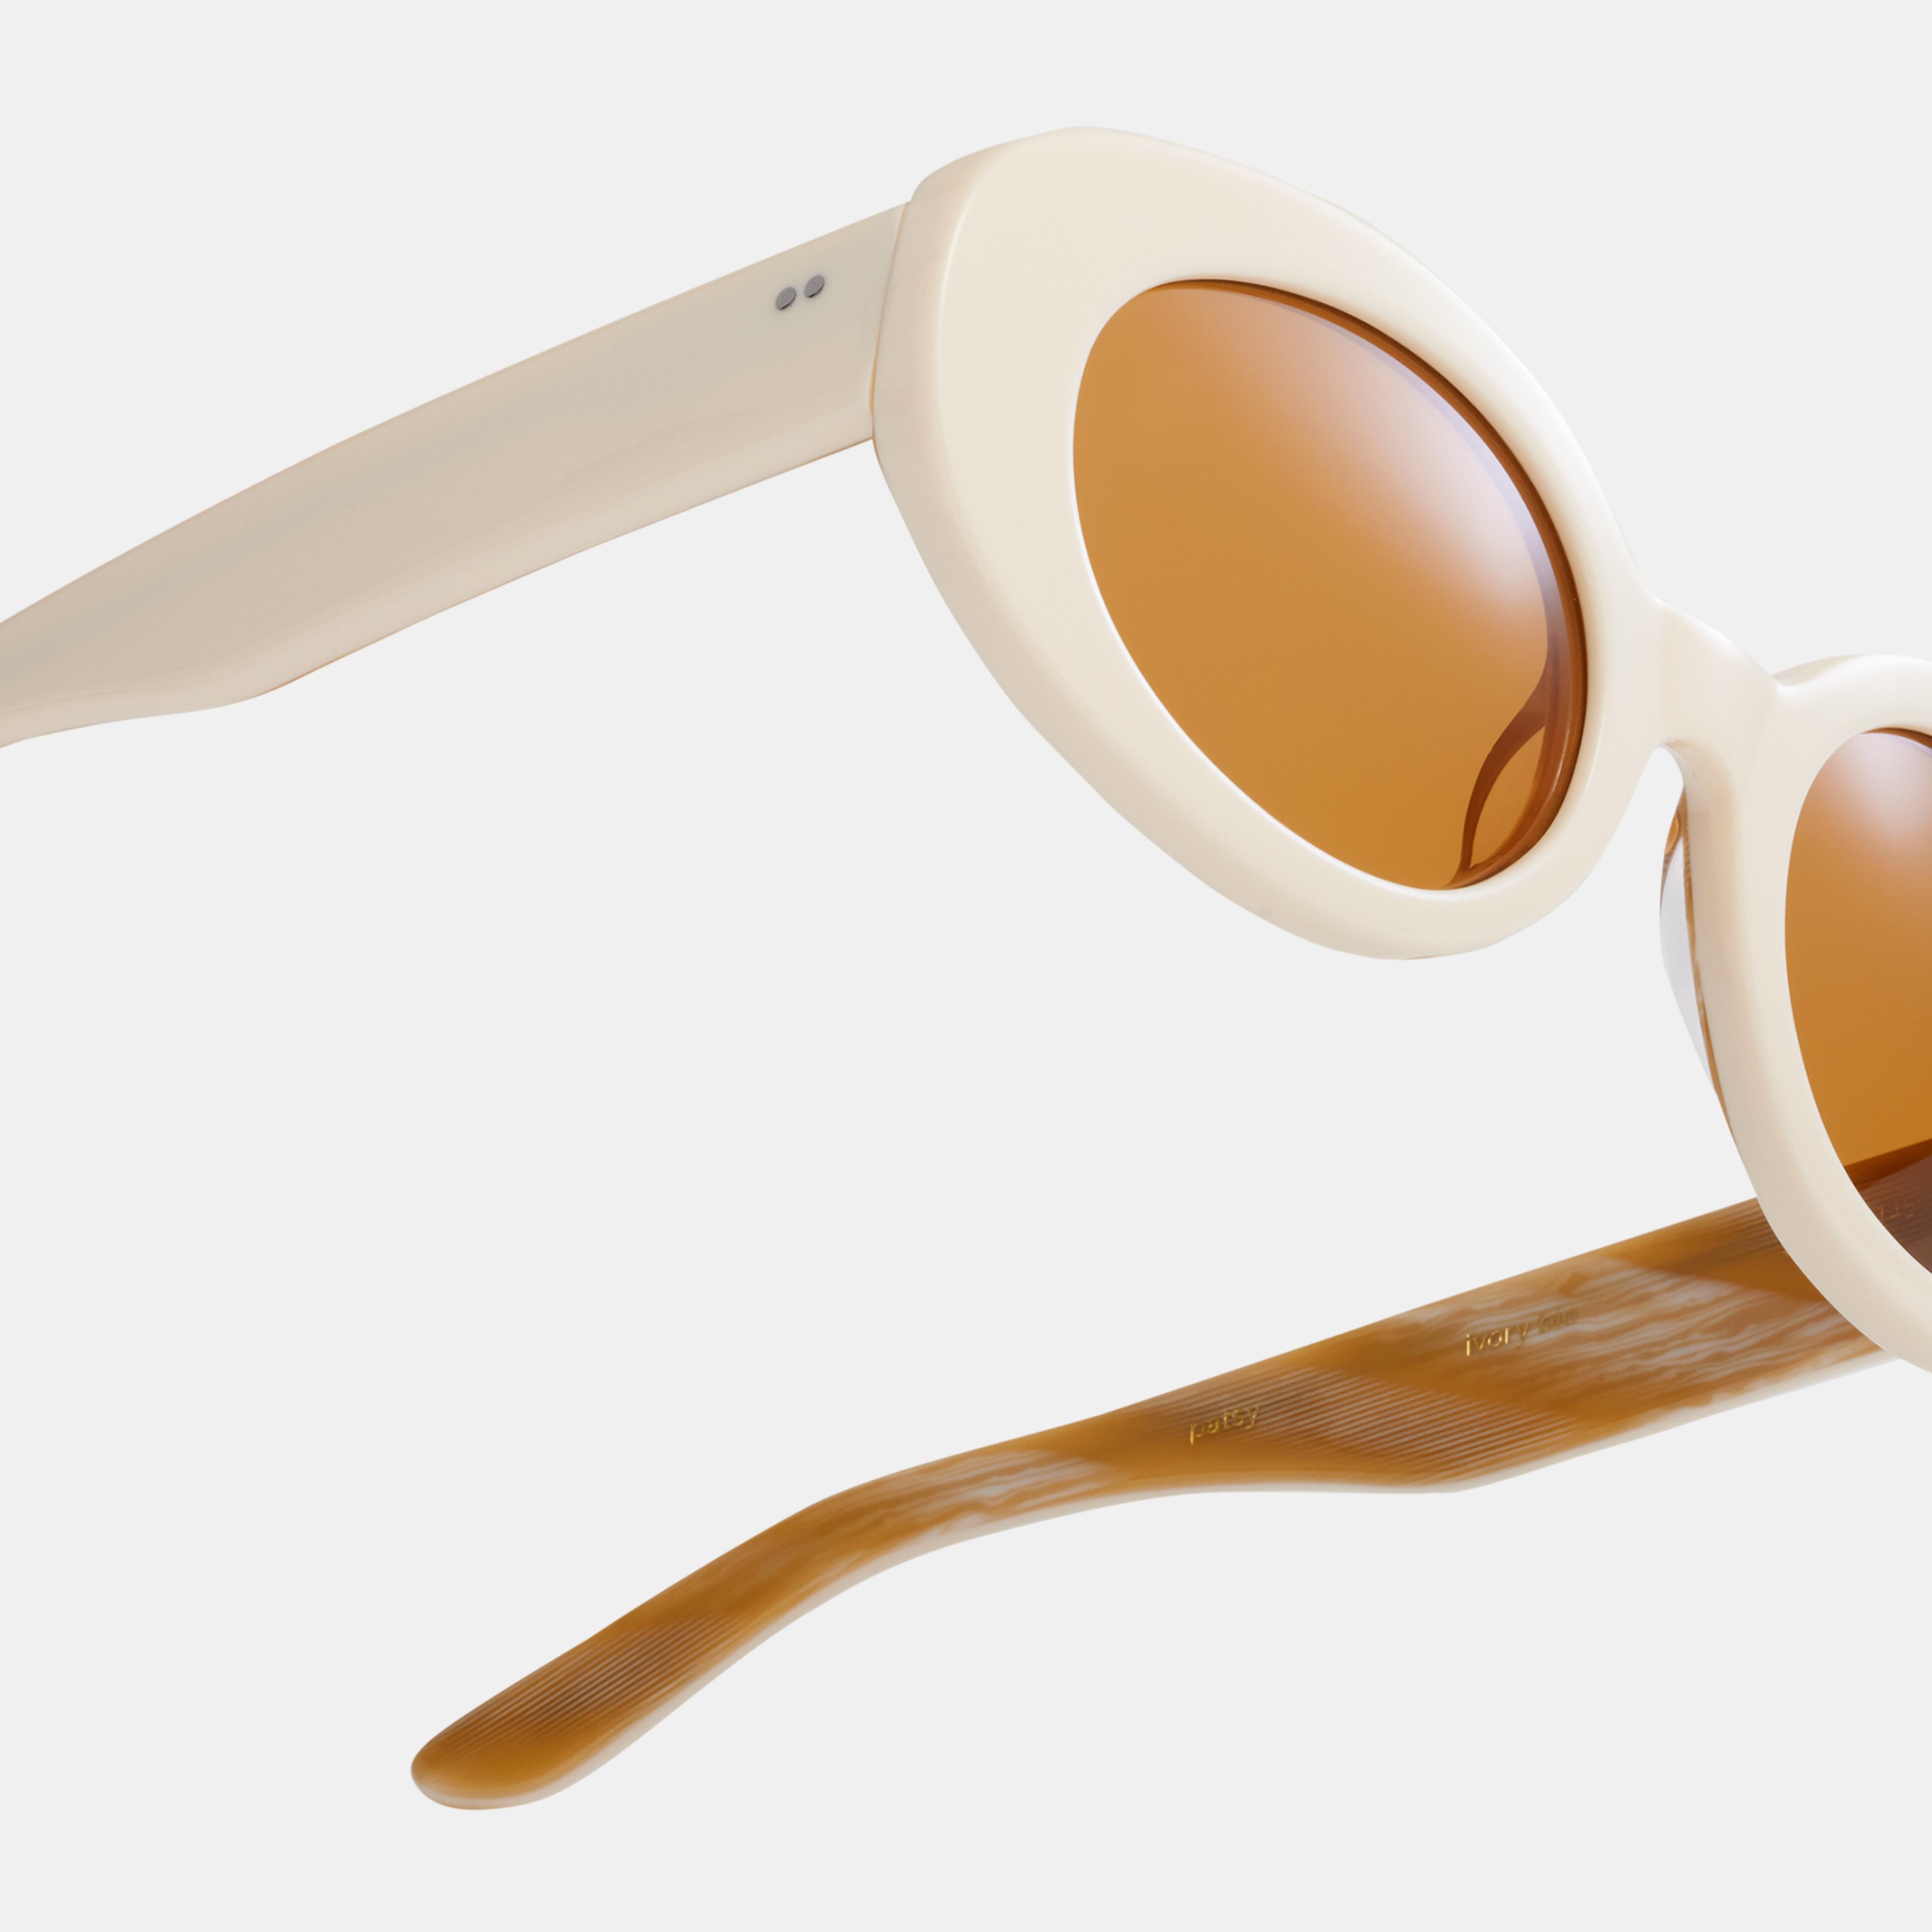 Ace & Tate Solaires | oval Bio-acétate in Blanc